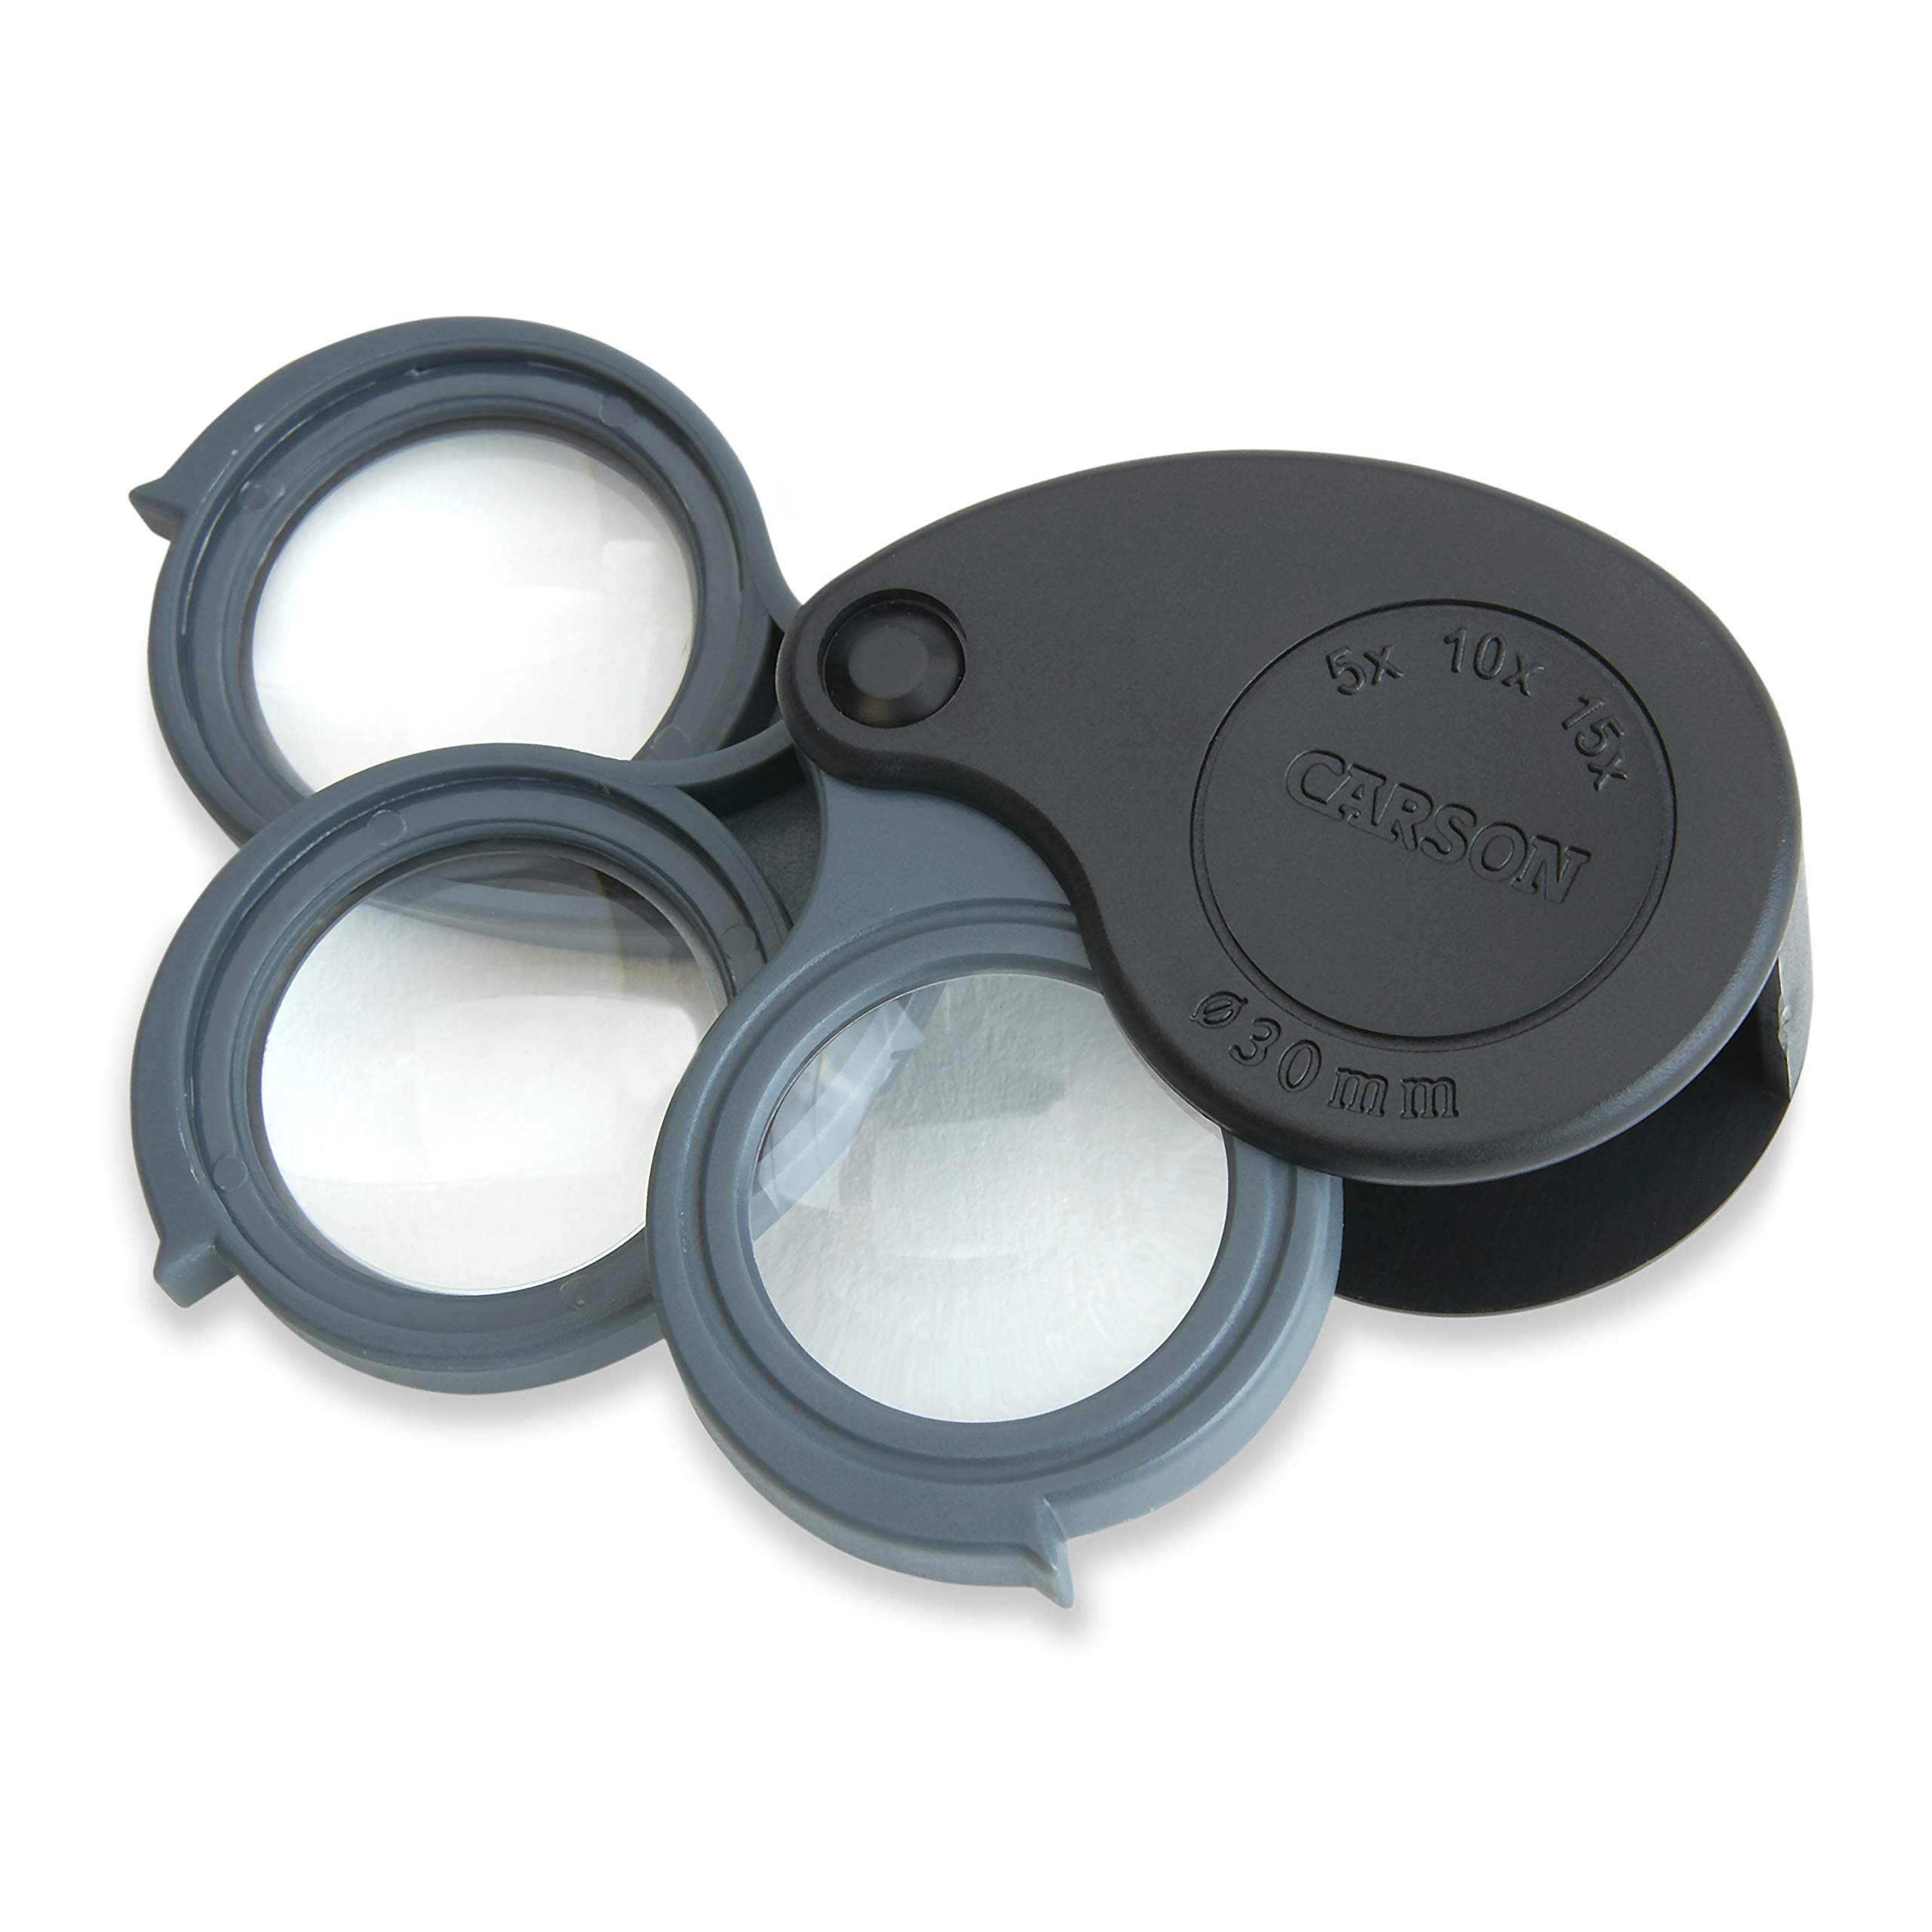 Carson TriView 5x/10x/15x Folding Loupe Magnifier with Built-in Case (TV-15), Black